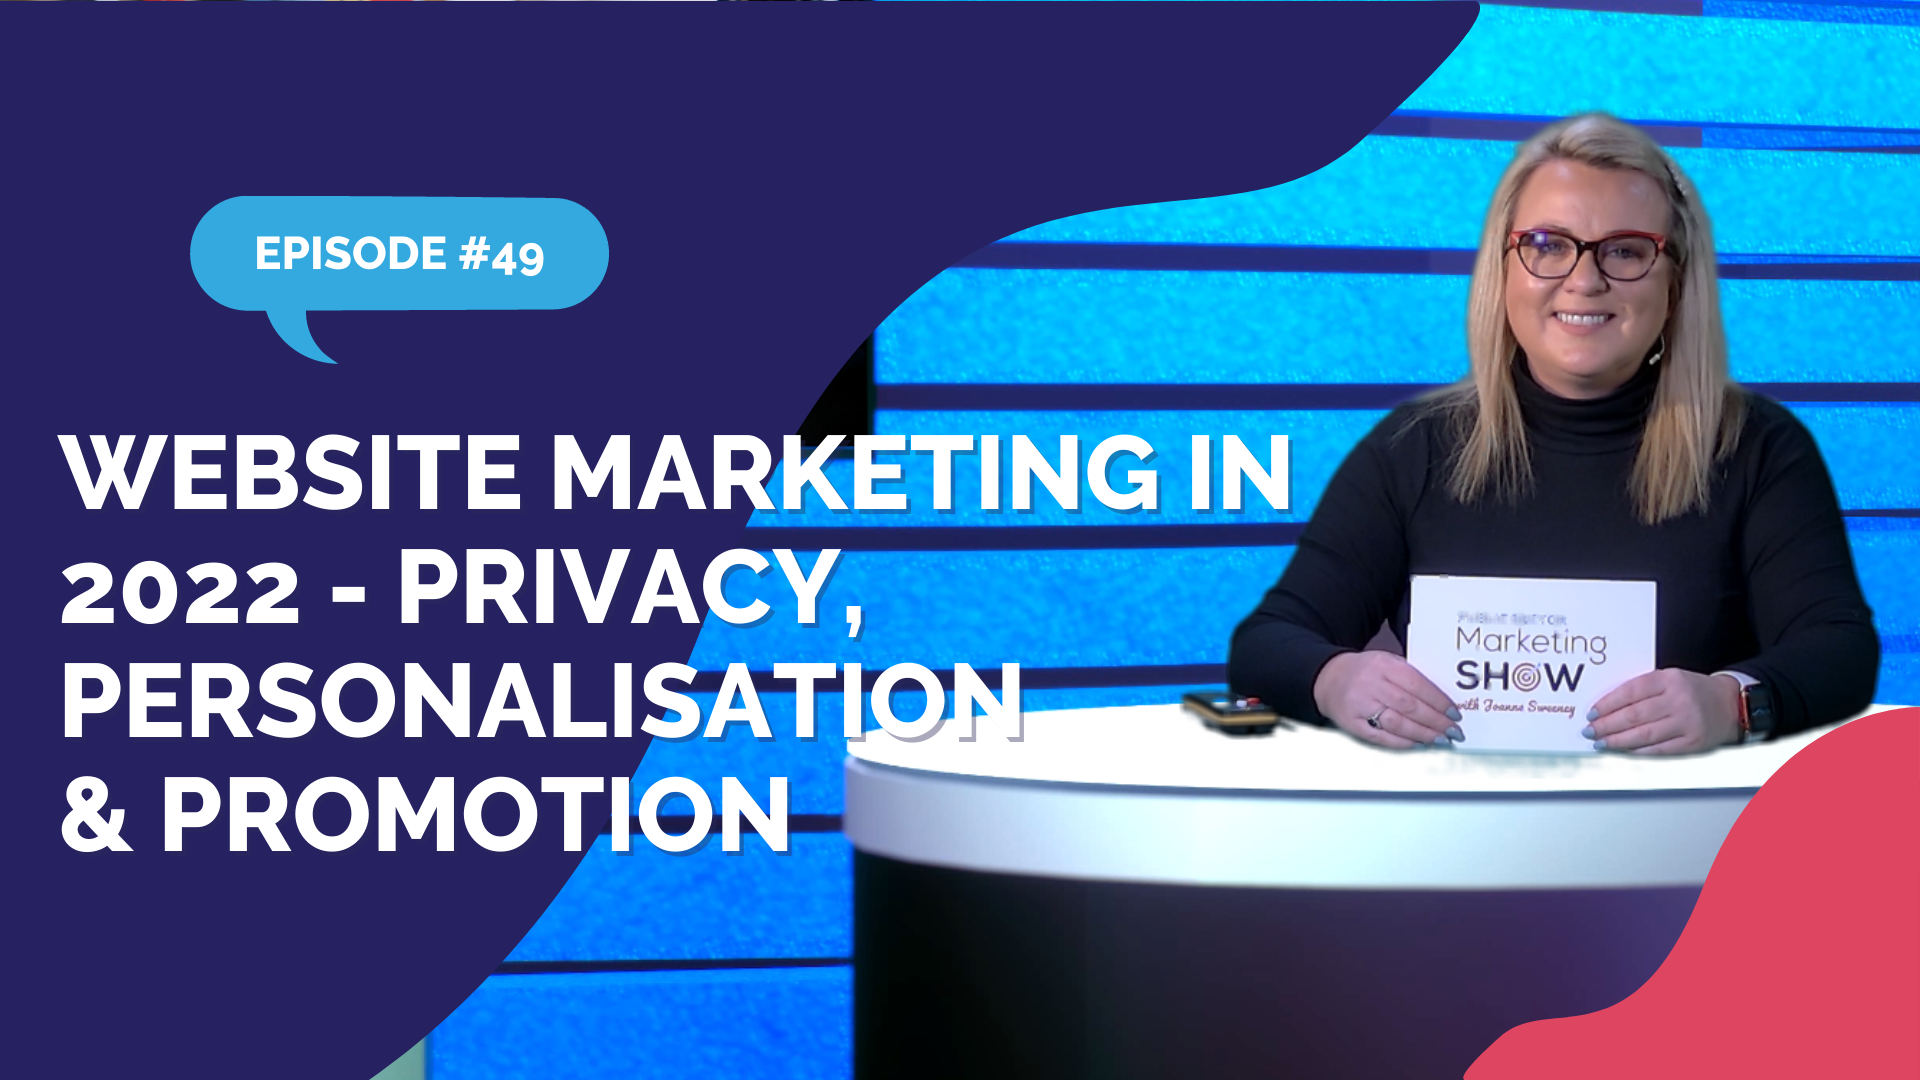 Episode 49 - Website Marketing in 2022 - Privacy, Personalisation & Promotion